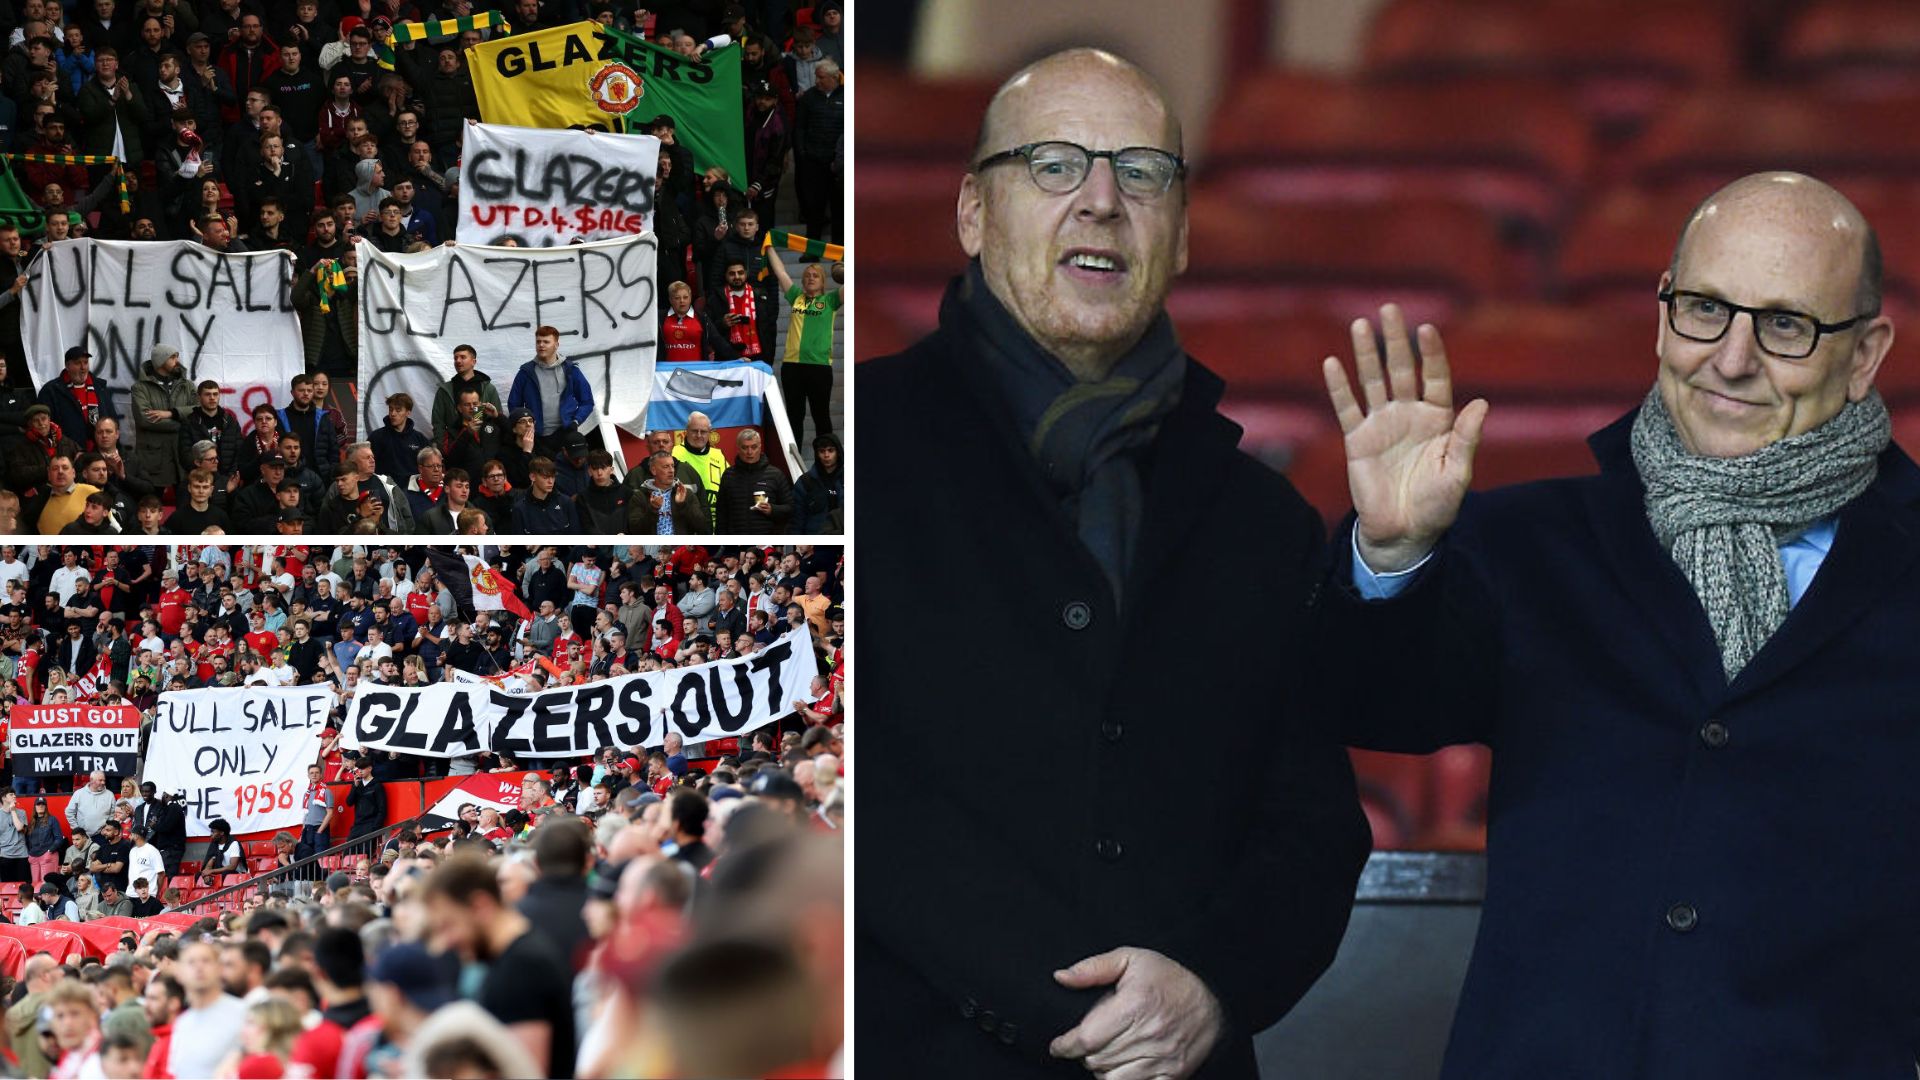 Manchester United legend urges Glazers to leave as supporter group fears 18-month saga